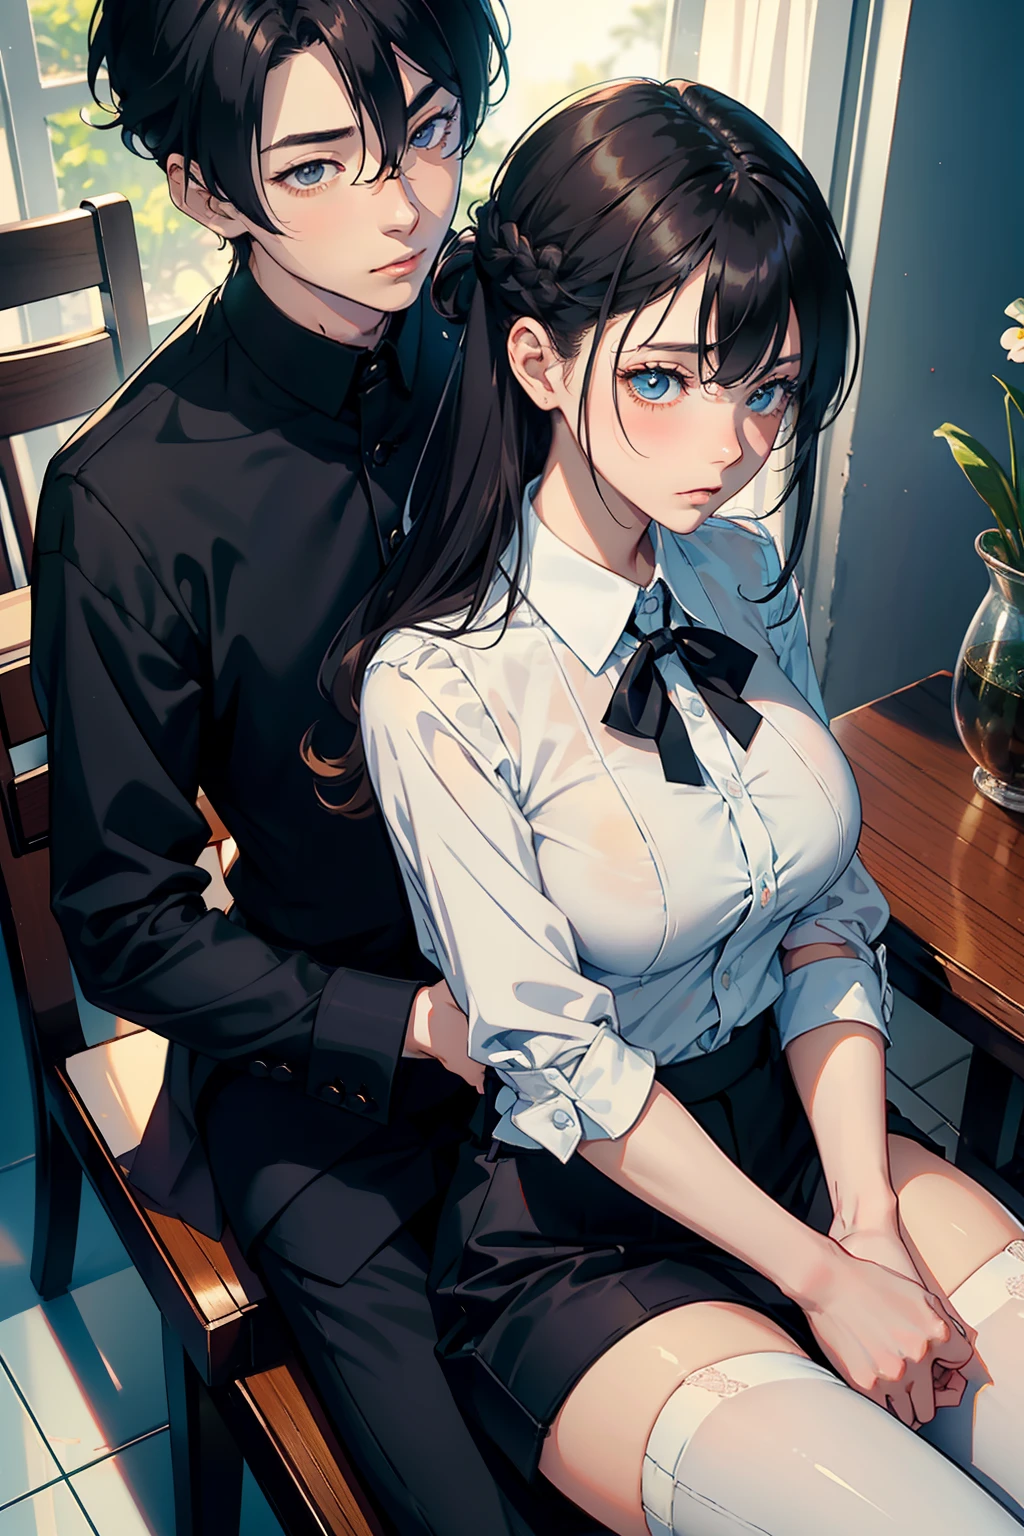 topquality　tmasterpiece　Male and female couples　Girl sitting on a chair in a narrow skirt over a blouse。Boys hugging each other from behind。Boys in school long pants with hairstyles。without glasses、Revenge Relations, Hot Kids, Sexy girl, big breasts, HotBoys